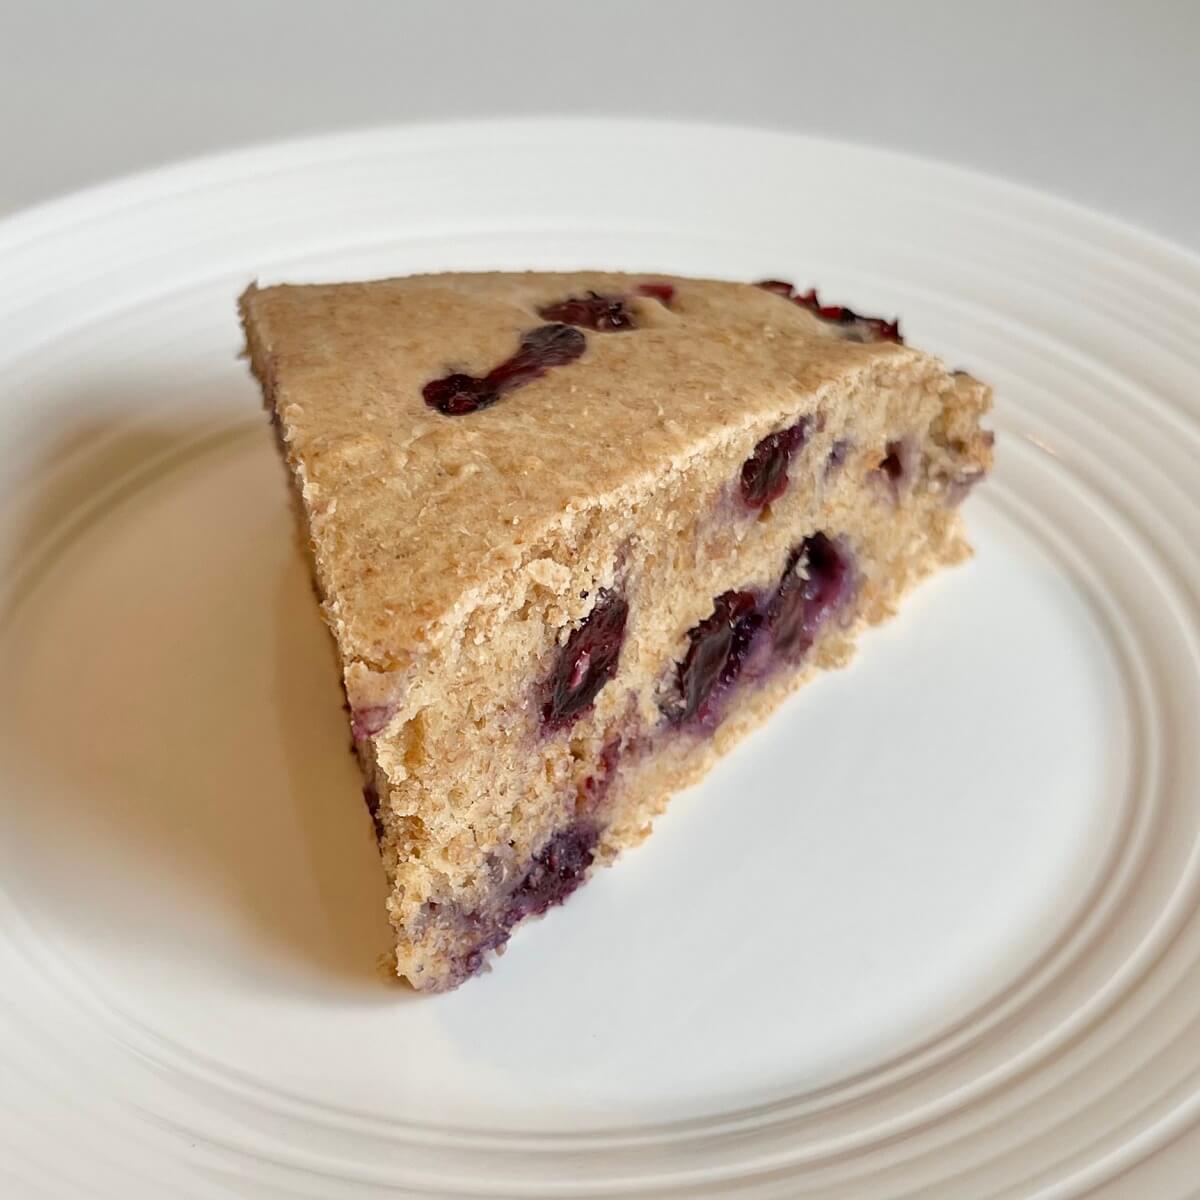 A thick slice of blueberry breakfast cake on a white plate.